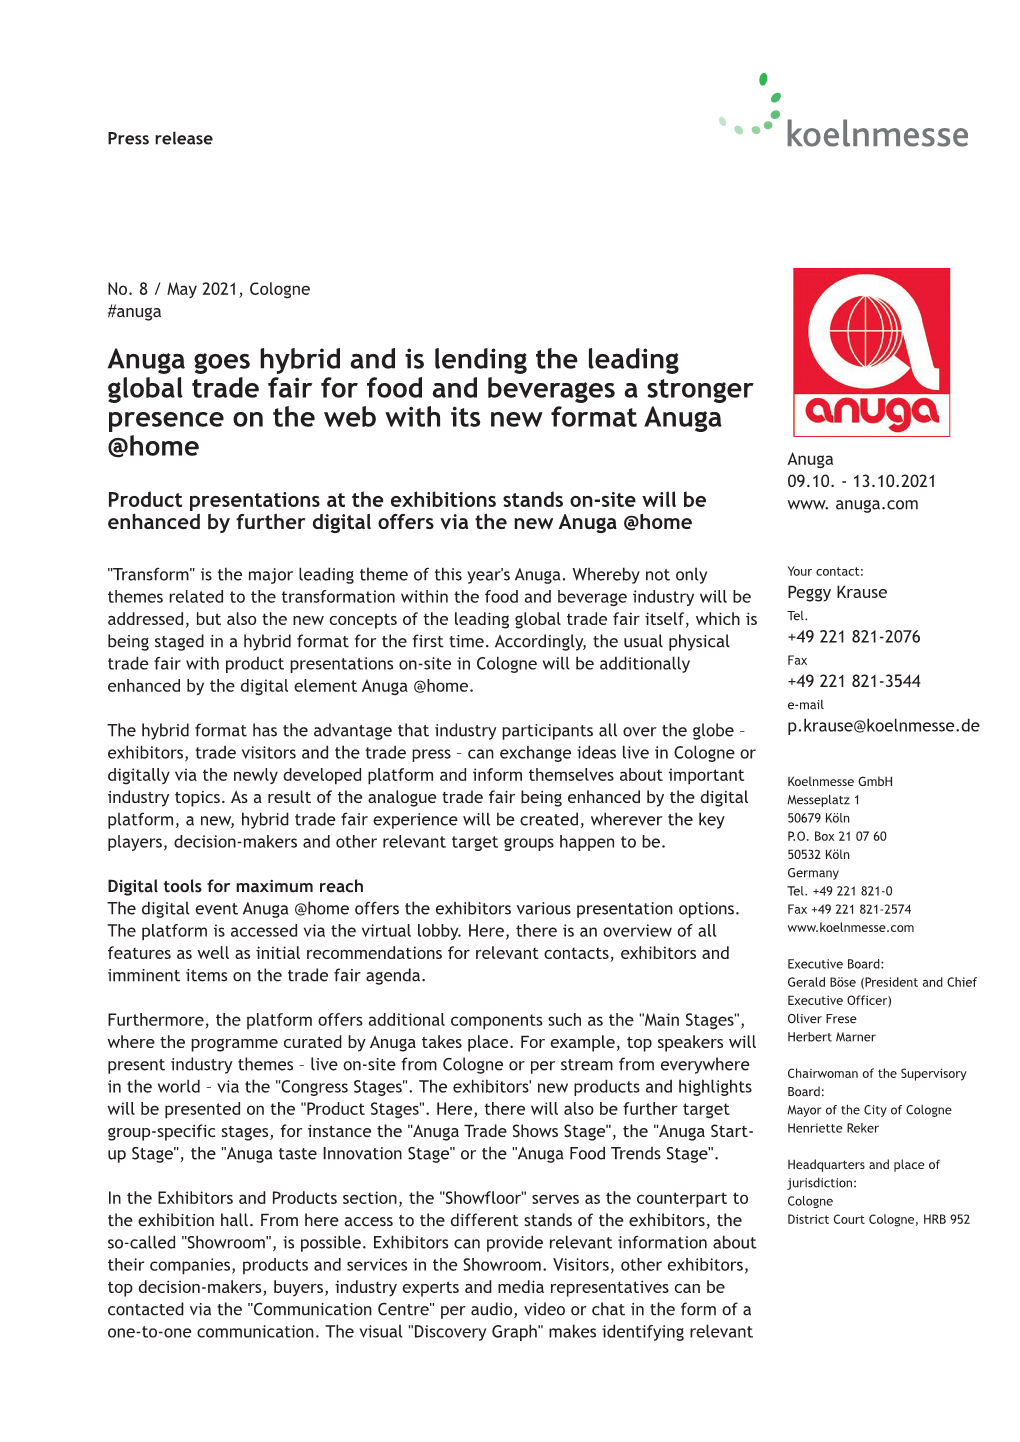 Anuga Goes Hybrid and Is Lending the Leading Global Trade Fair for Food and Beverages a Stronger Presence on the Web with Its New Format Anuga